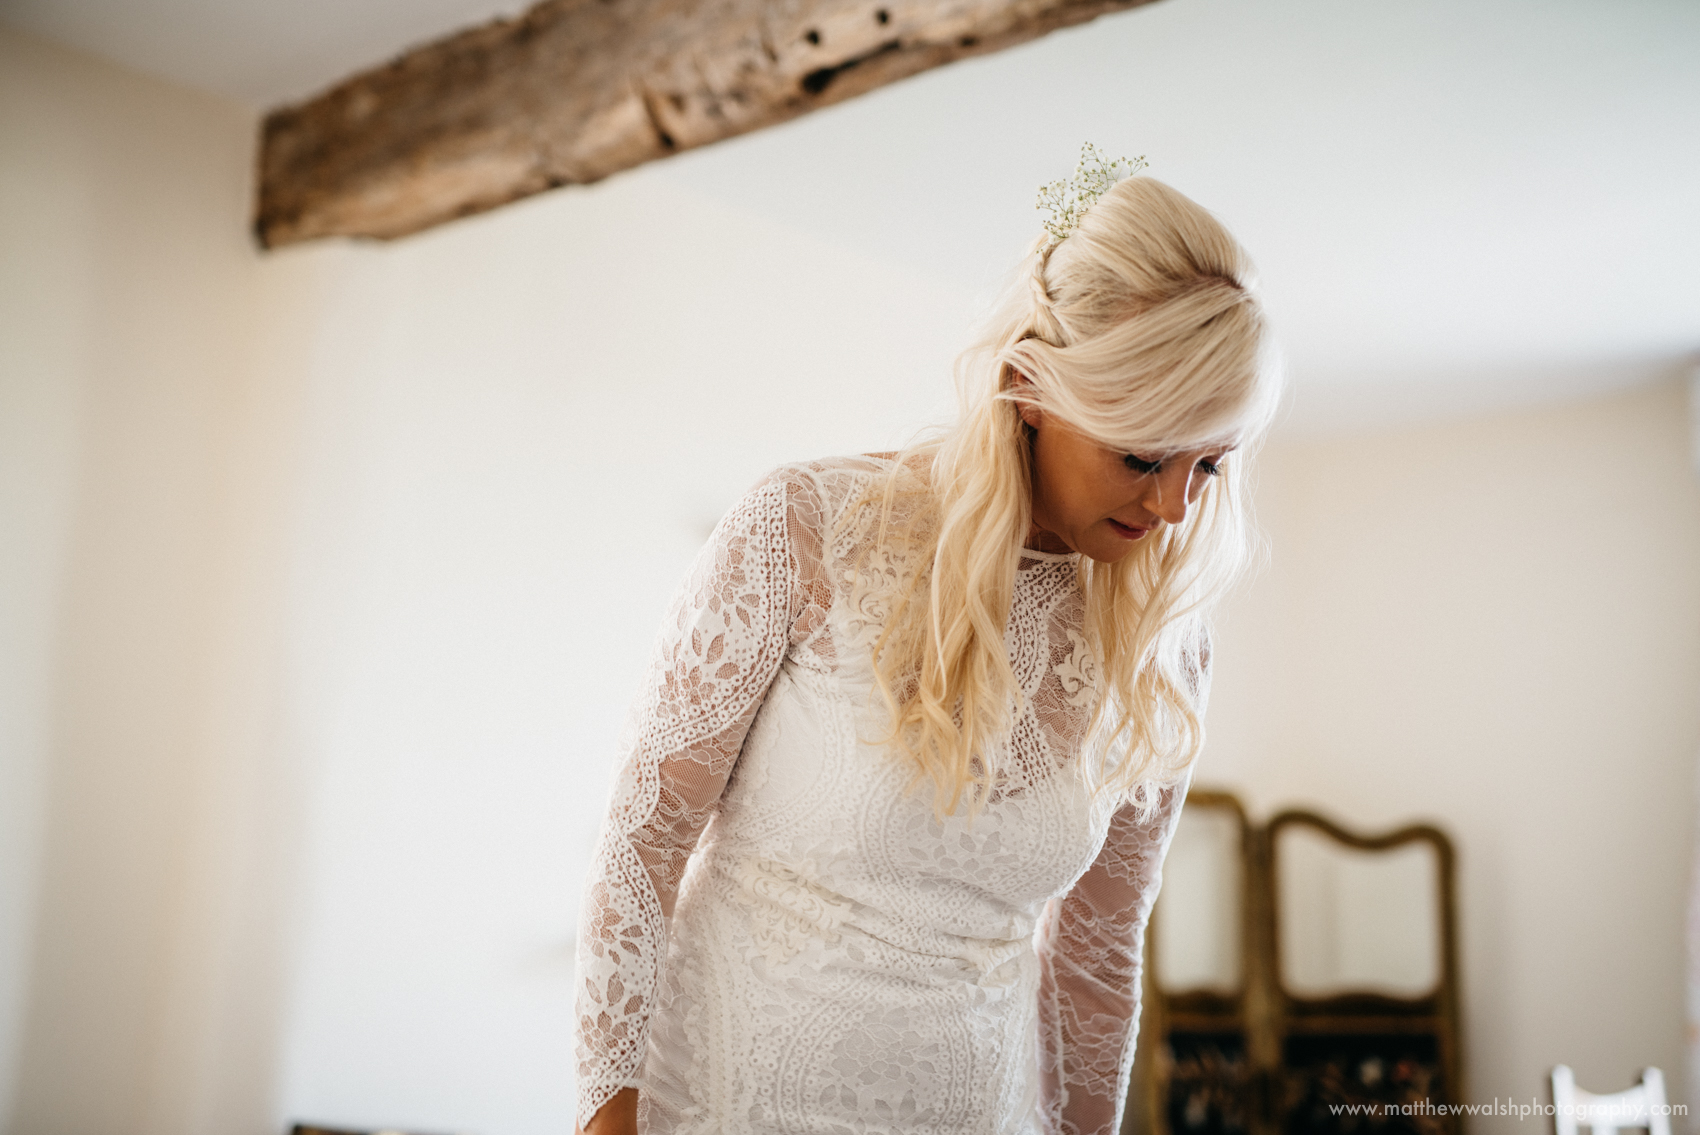 The bride looking elegant in her beautiful lace wedding dress